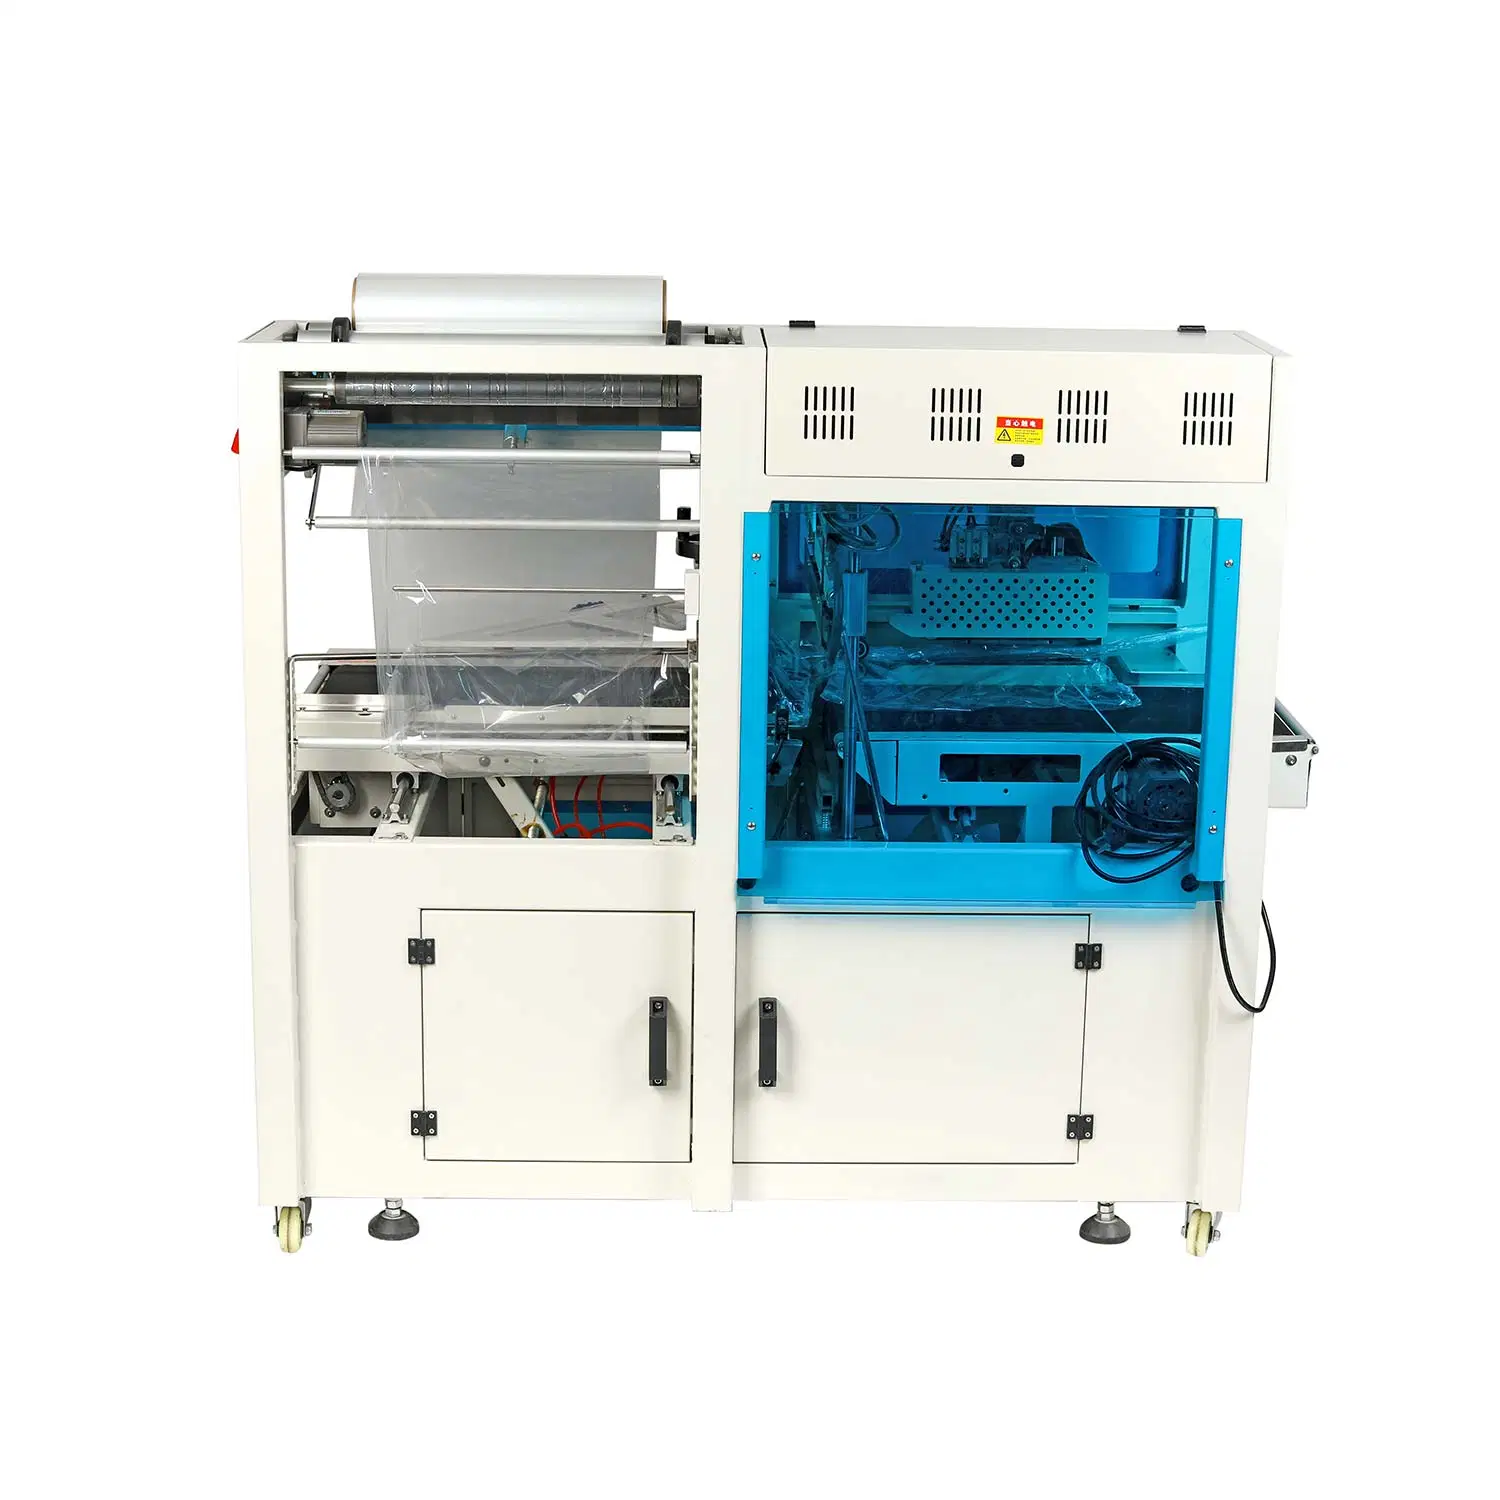 Automatic Continuous Side Sealing and Cutting POF Film Package Machine